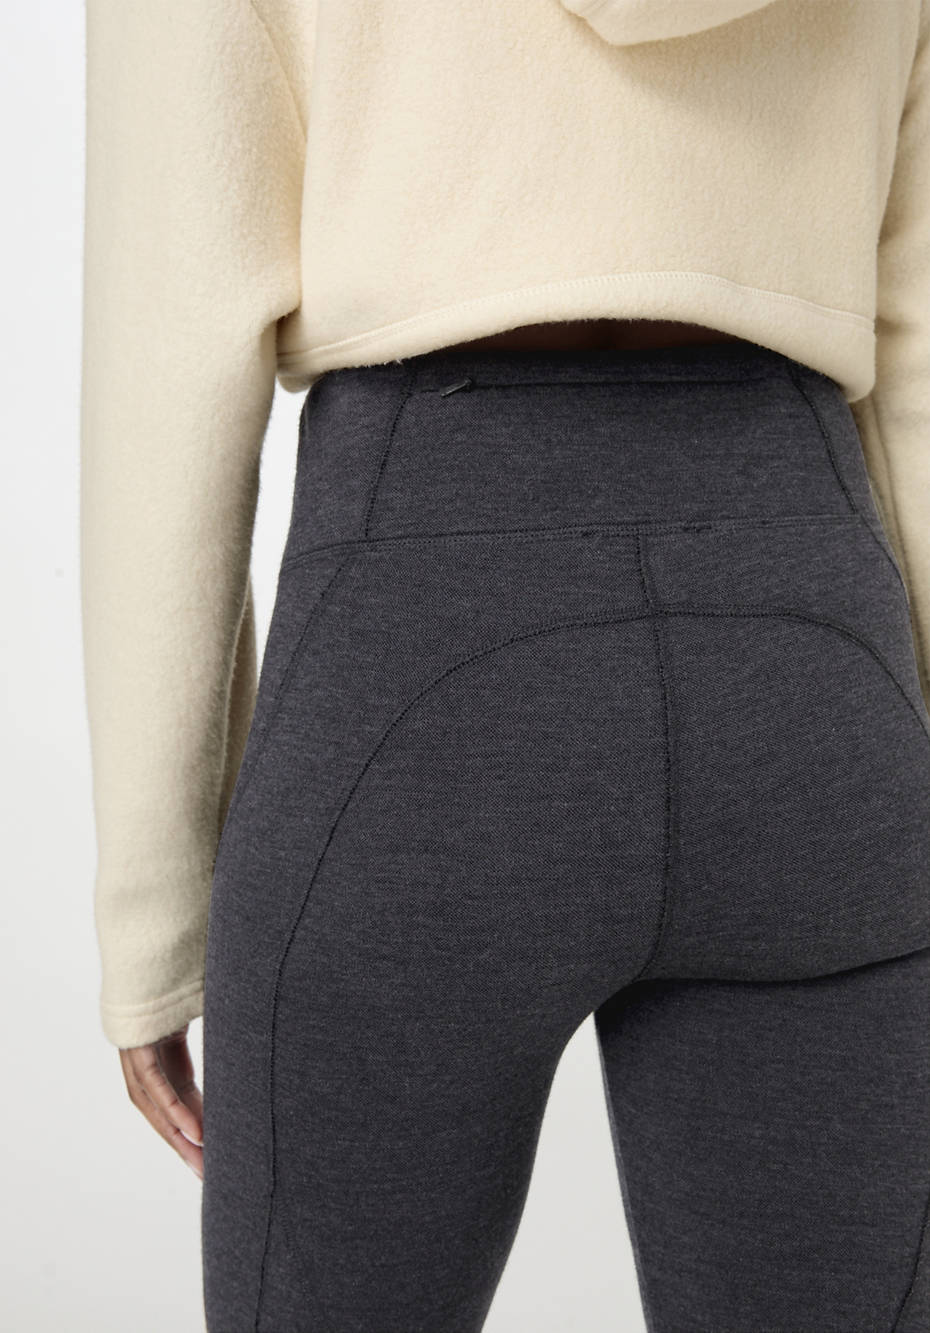 https://imgs7.hessnatur.com/is/image/HessNatur/hyb_redes_detail_main/Leggings_Fitted_Medium_Cut_ACTIVE_FUNCTIONAL_made_of_organic_merino_wool_with_organic_cotton-52995_88_4.jpg